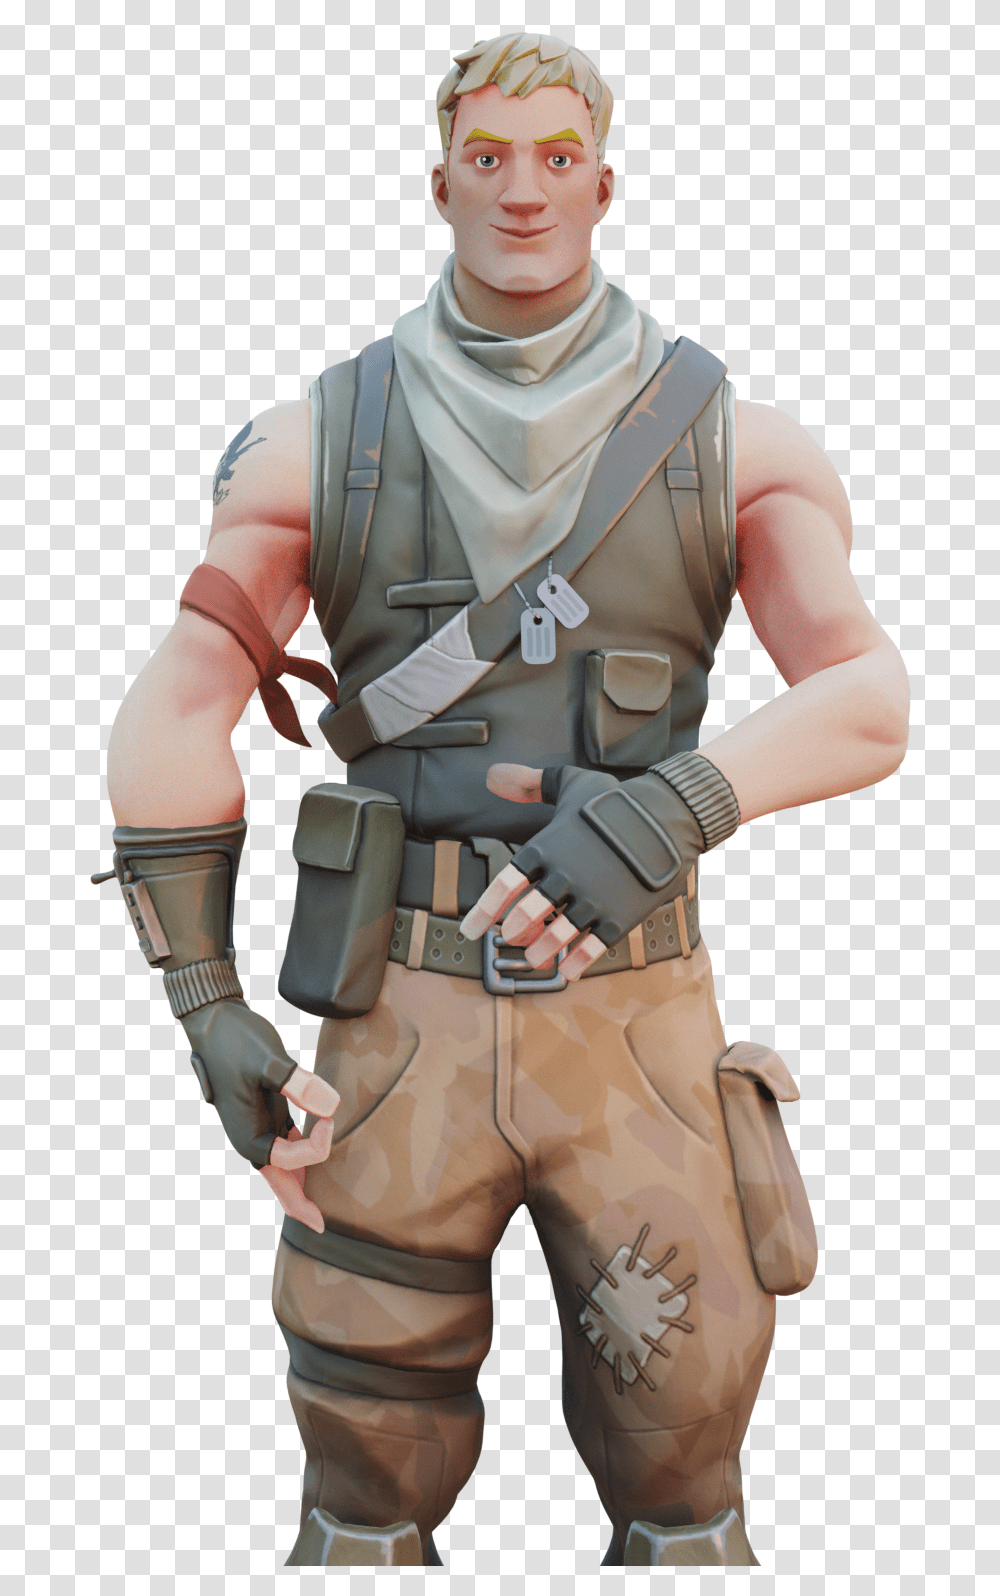 New To Rendering Would Like Feedback Fortnitebr Soldier, Costume, Person, Human, Figurine Transparent Png